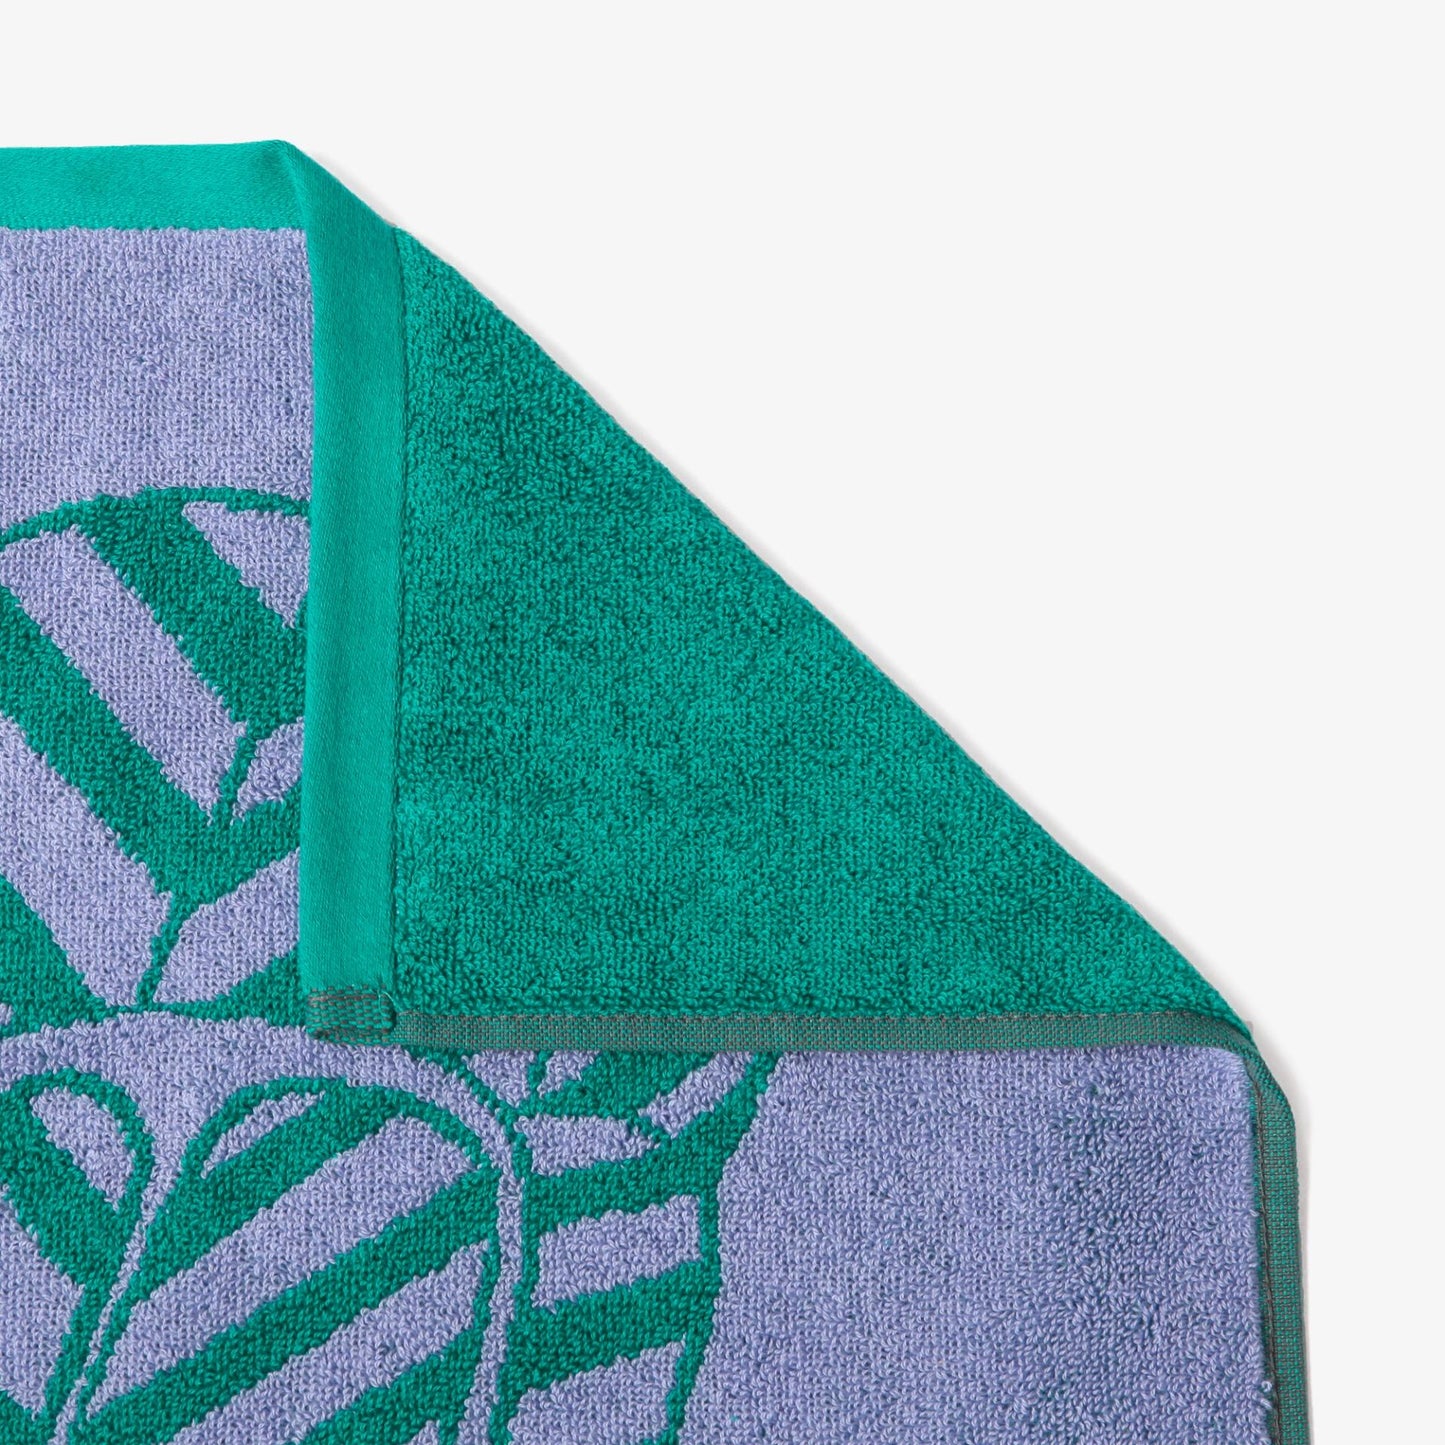 TOUCAN THICK TOWEL in LAVENDER by Inoui Editions